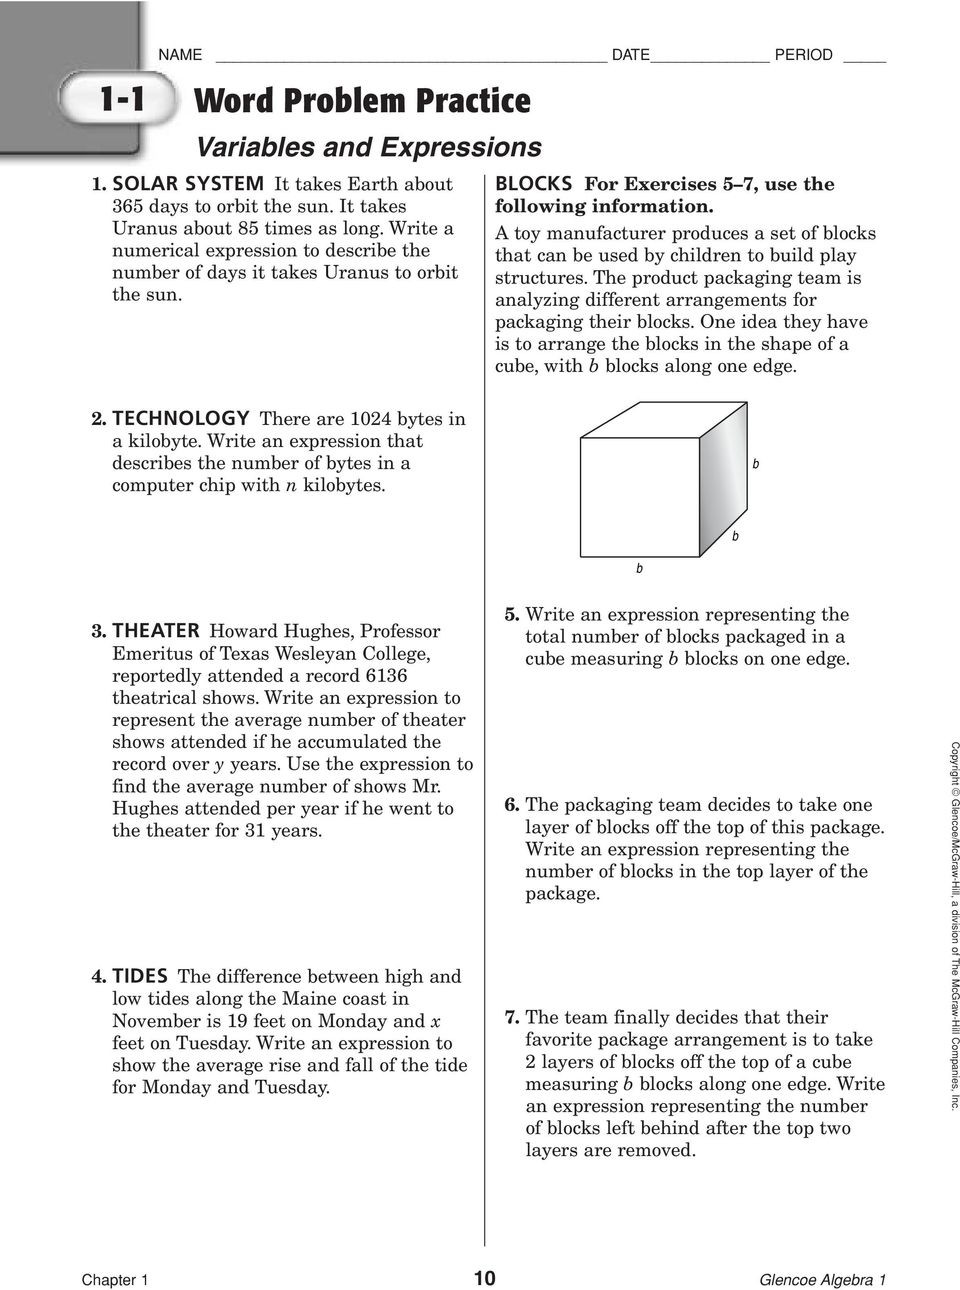 Linear Functions Word Problems Worksheet 6 5 Word Problem Practice Applying Systems Linear